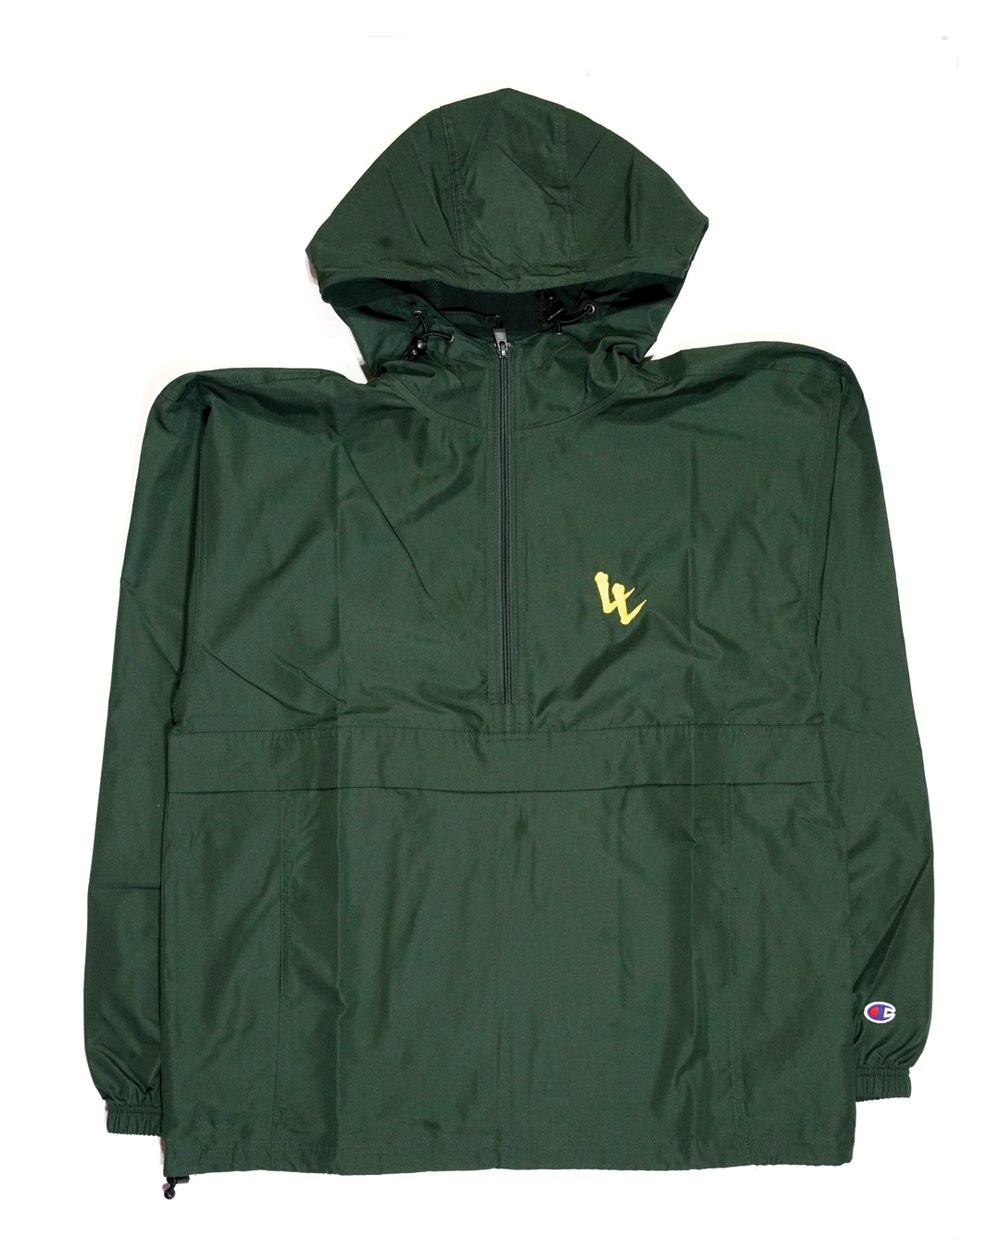 Image of Long Live Champion Packable Qtr Zip Jacket - Dark Green